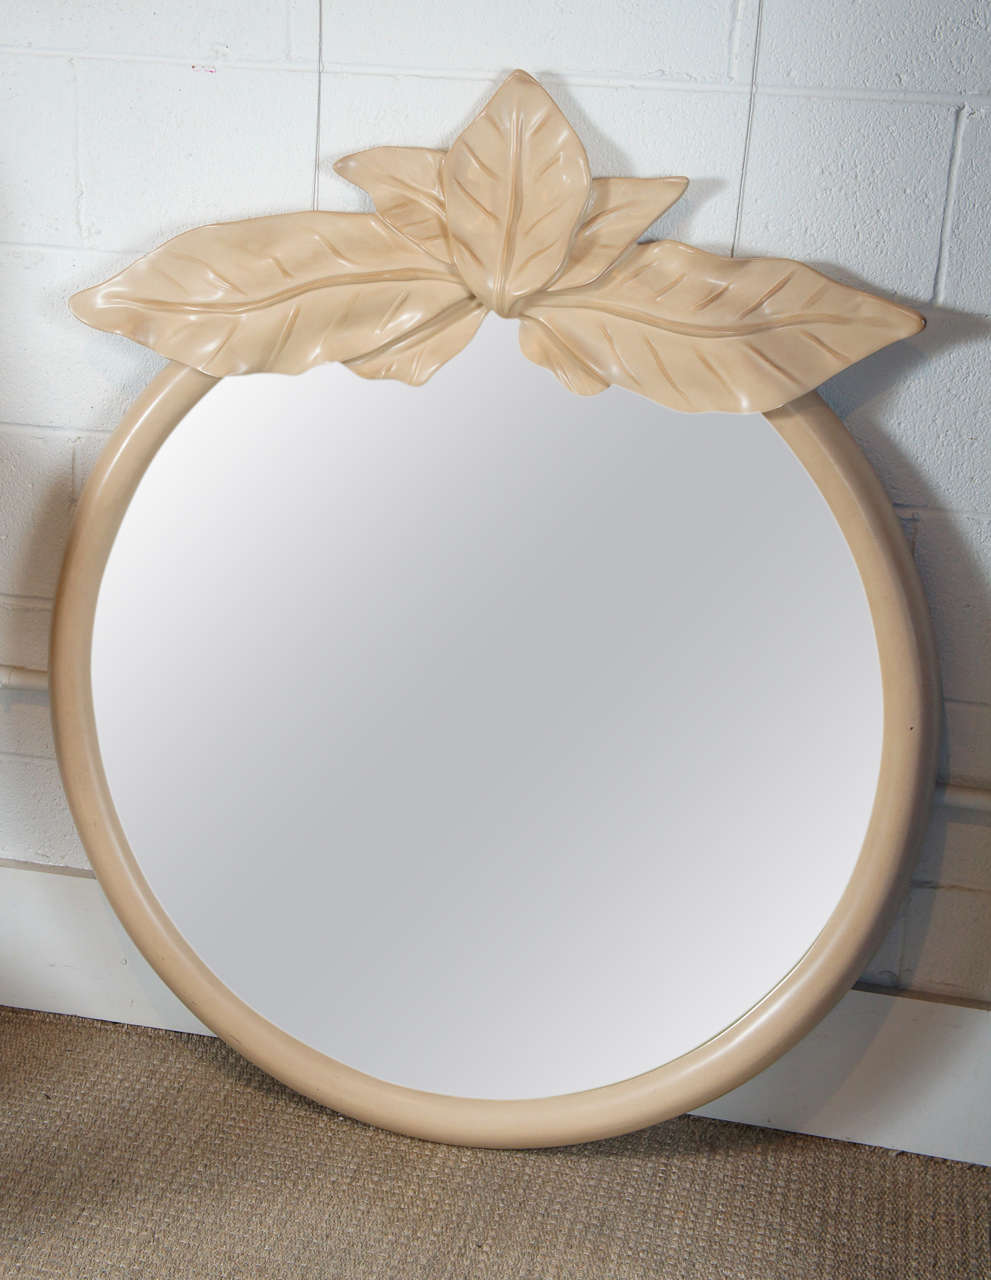 Here is a beautiful mirror with a palm leaf motif in a parchment finish.
The surface is painted with a smooth finish with defined leaves.